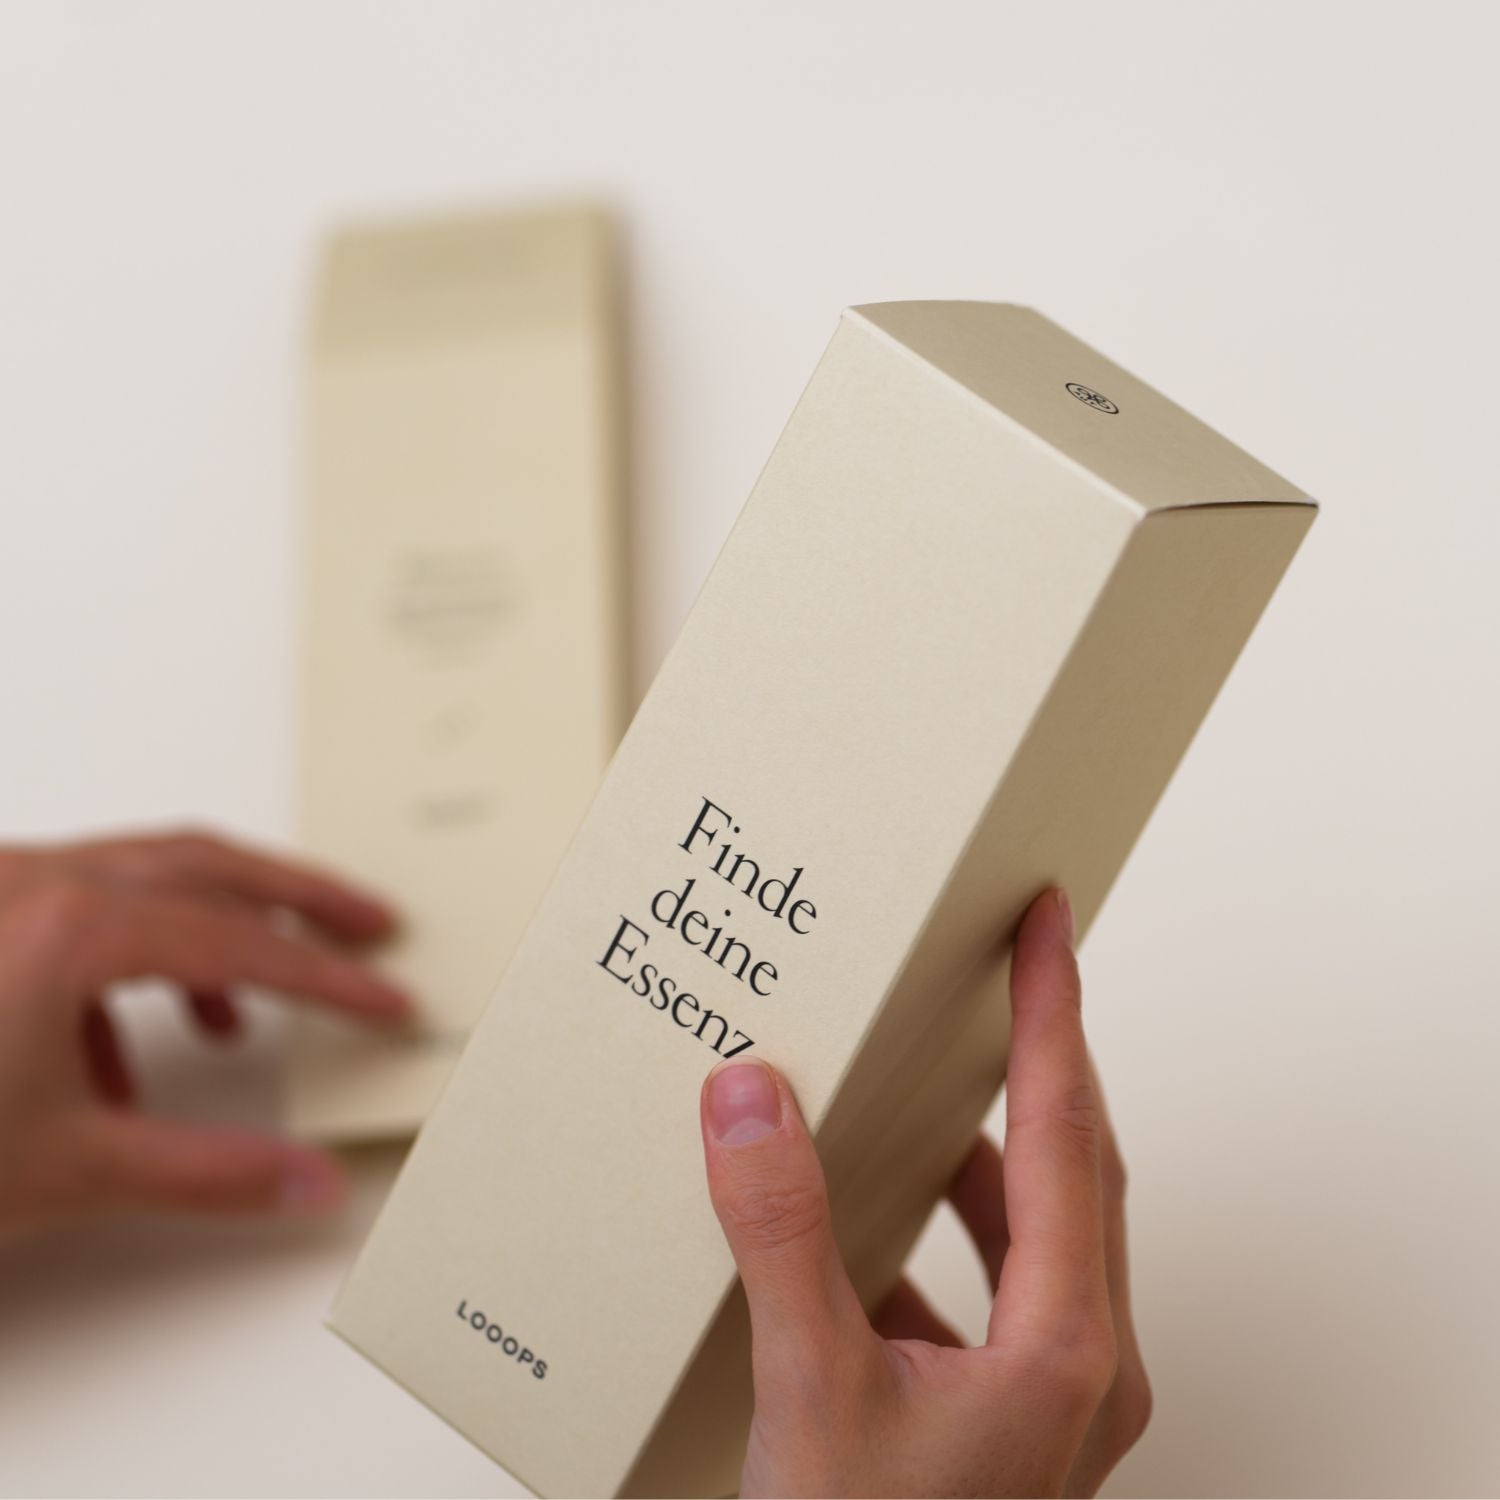 Looops packaging fragrance stick diffuser with hand